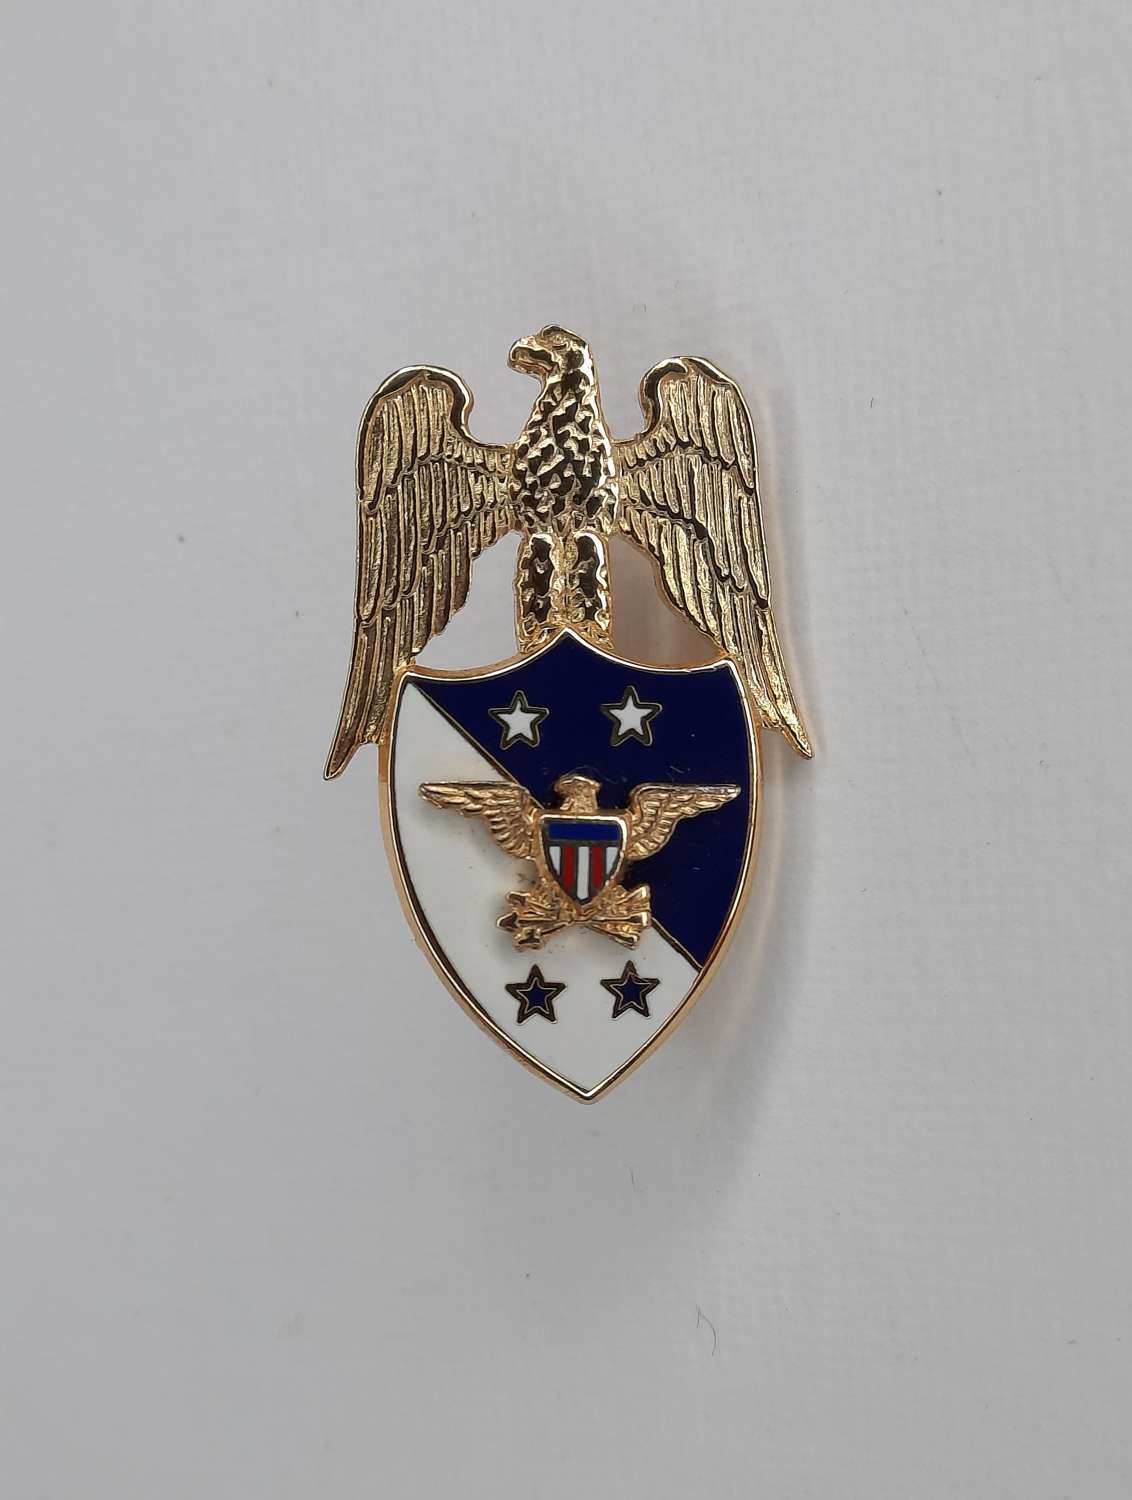 US Aide to Chief of Staff Collar Device